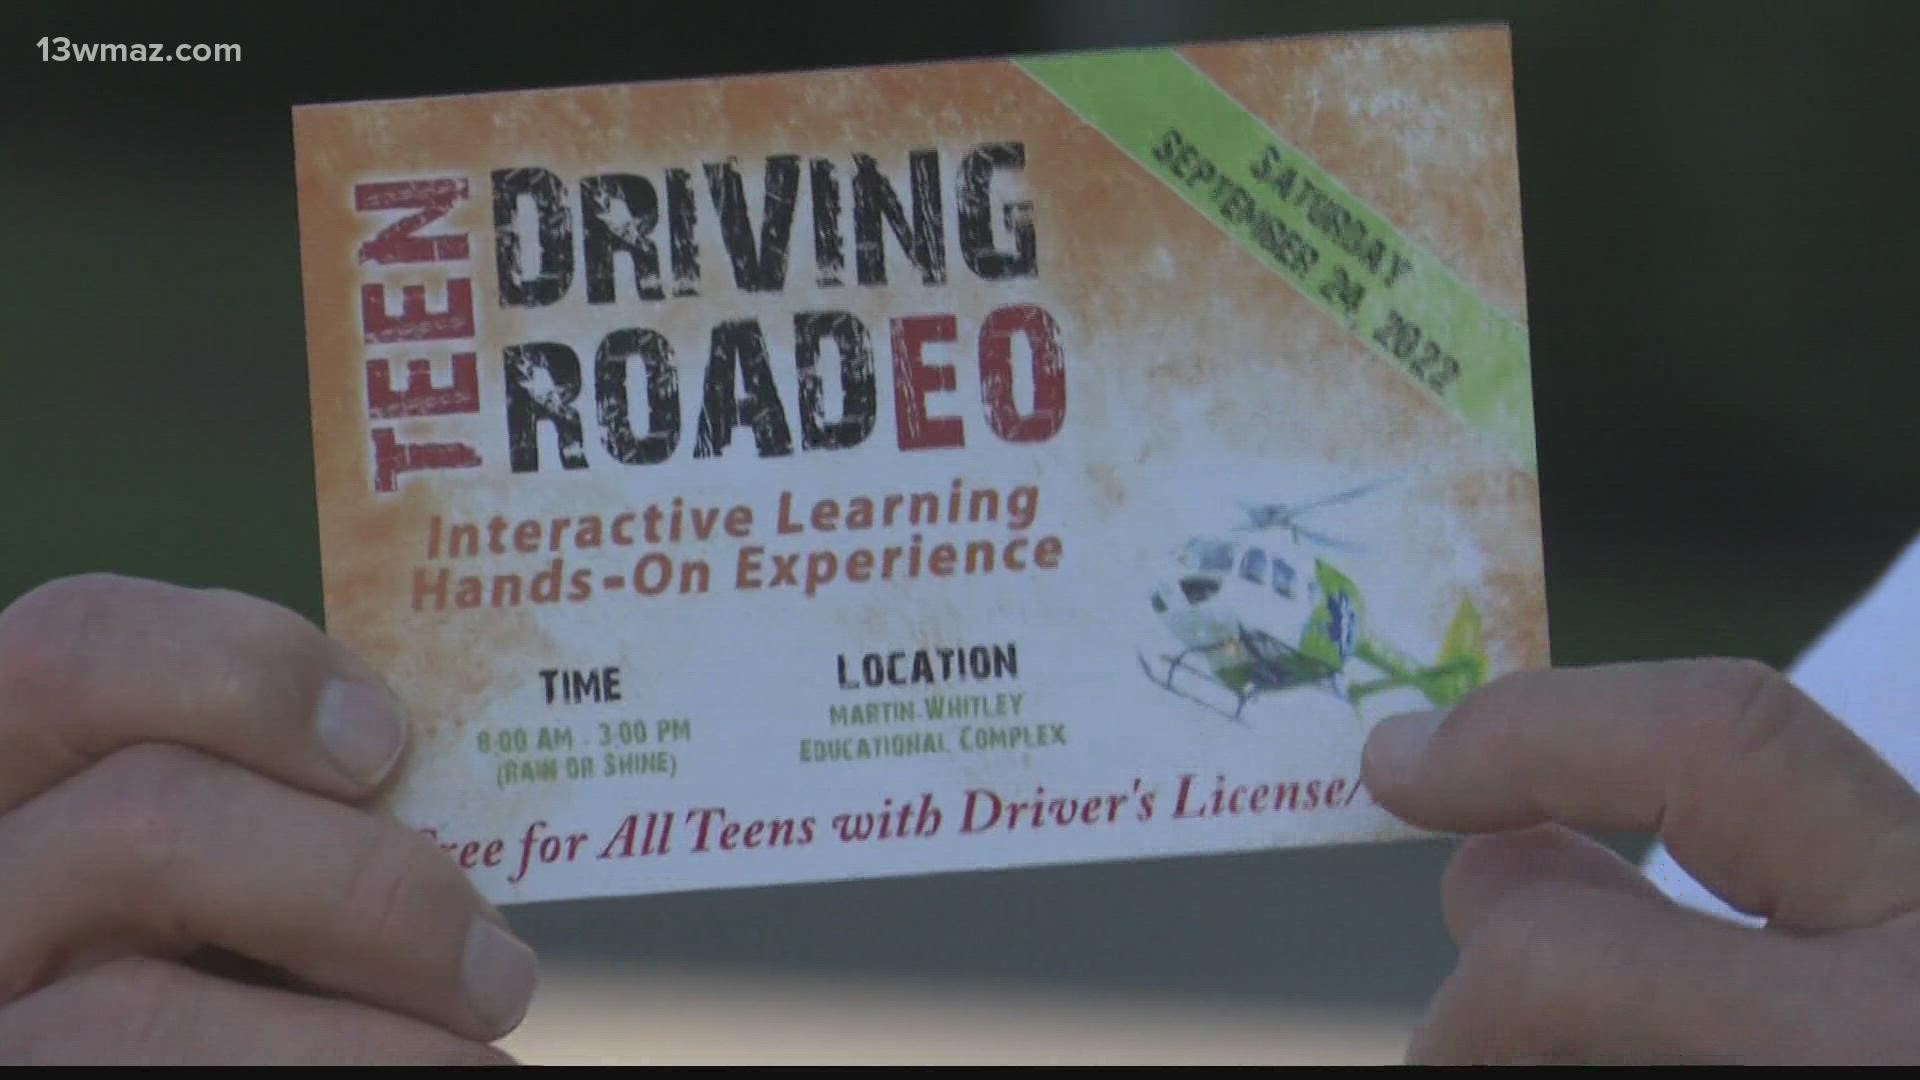 The event teaches teens about the dangers of driving, along with the consequences of reckless driving.